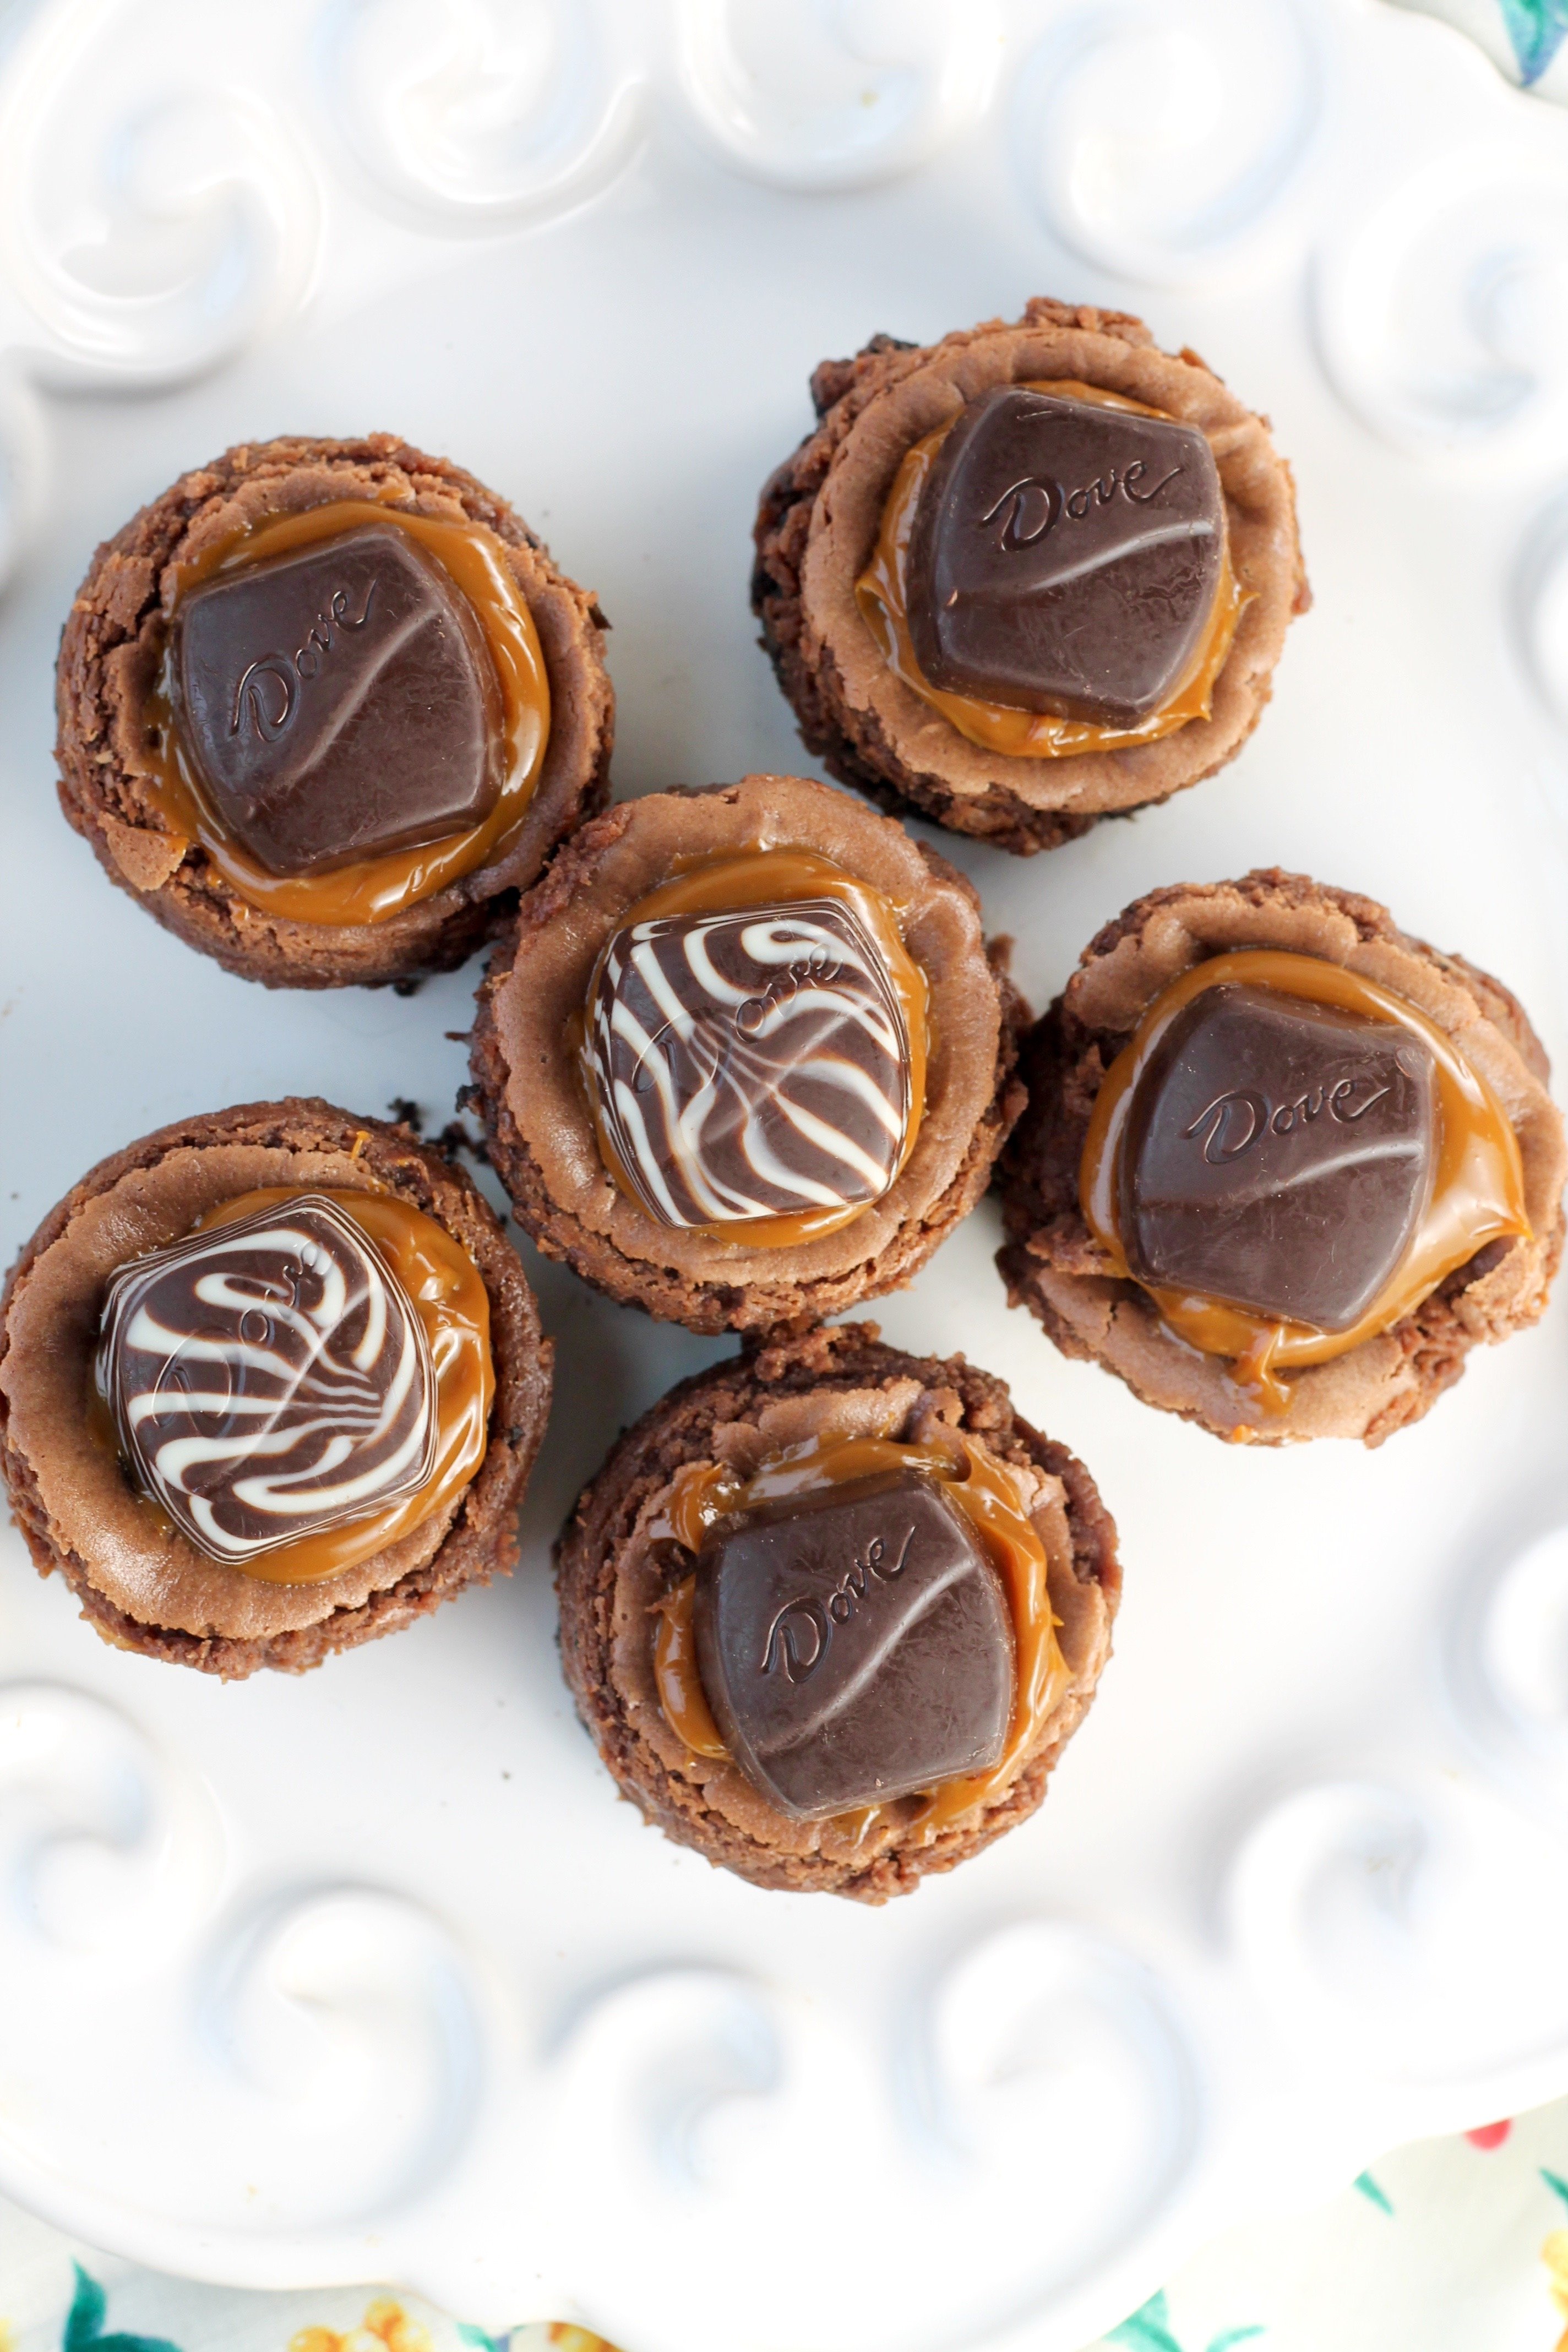 Mini Dove Cheesecakes with dulce de leche caramel and chocolate cheesecake